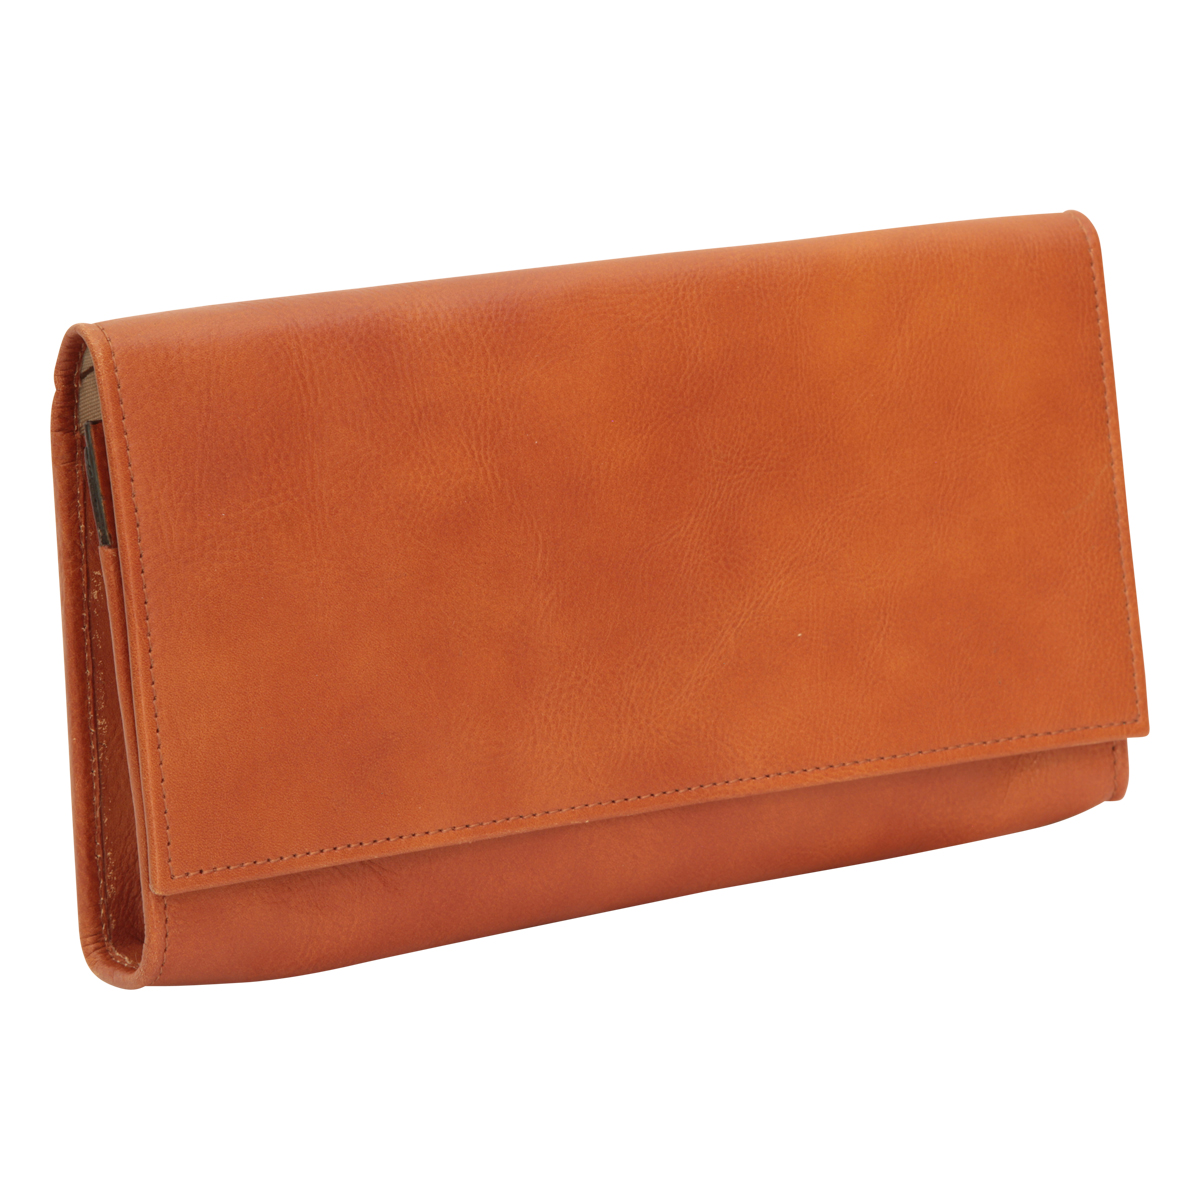 Leather Portfolio - Colonial | 553889CO UK | Old Angler Firenze